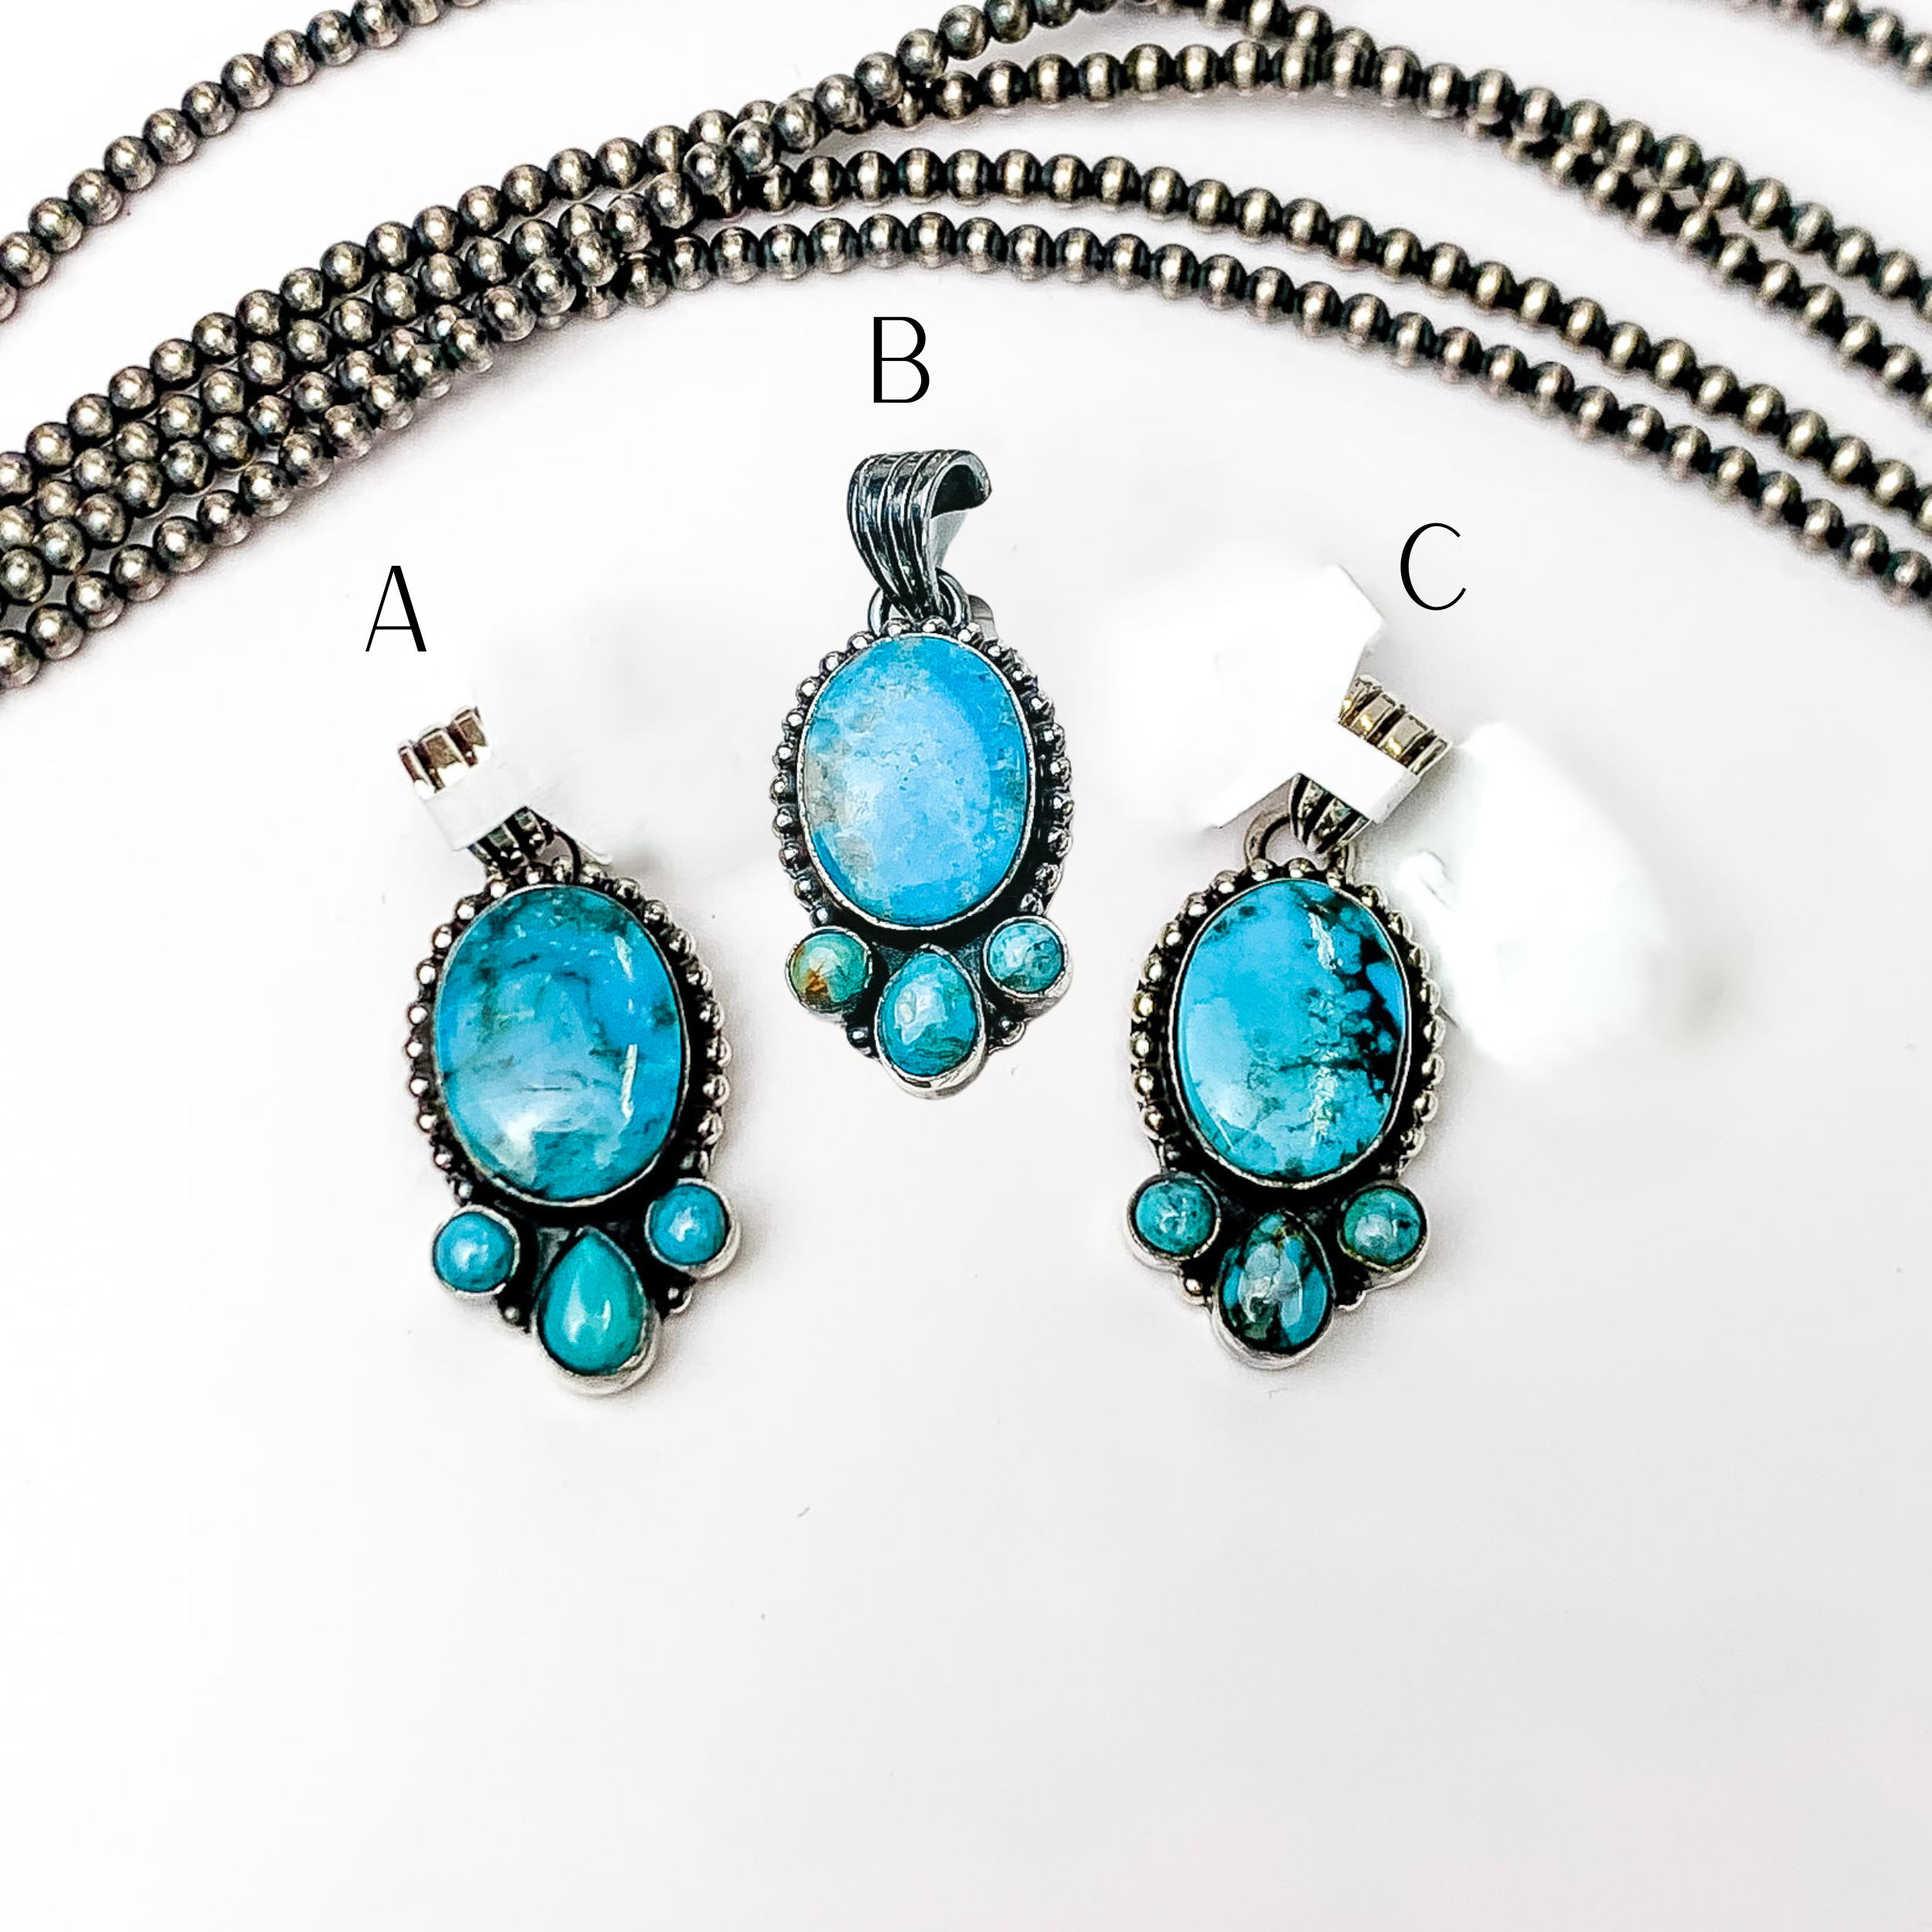 HaDa Collections | Sterling Silver and Kingman Turquoise Round Stone Pendant with Three Accent Stones - Giddy Up Glamour Boutique